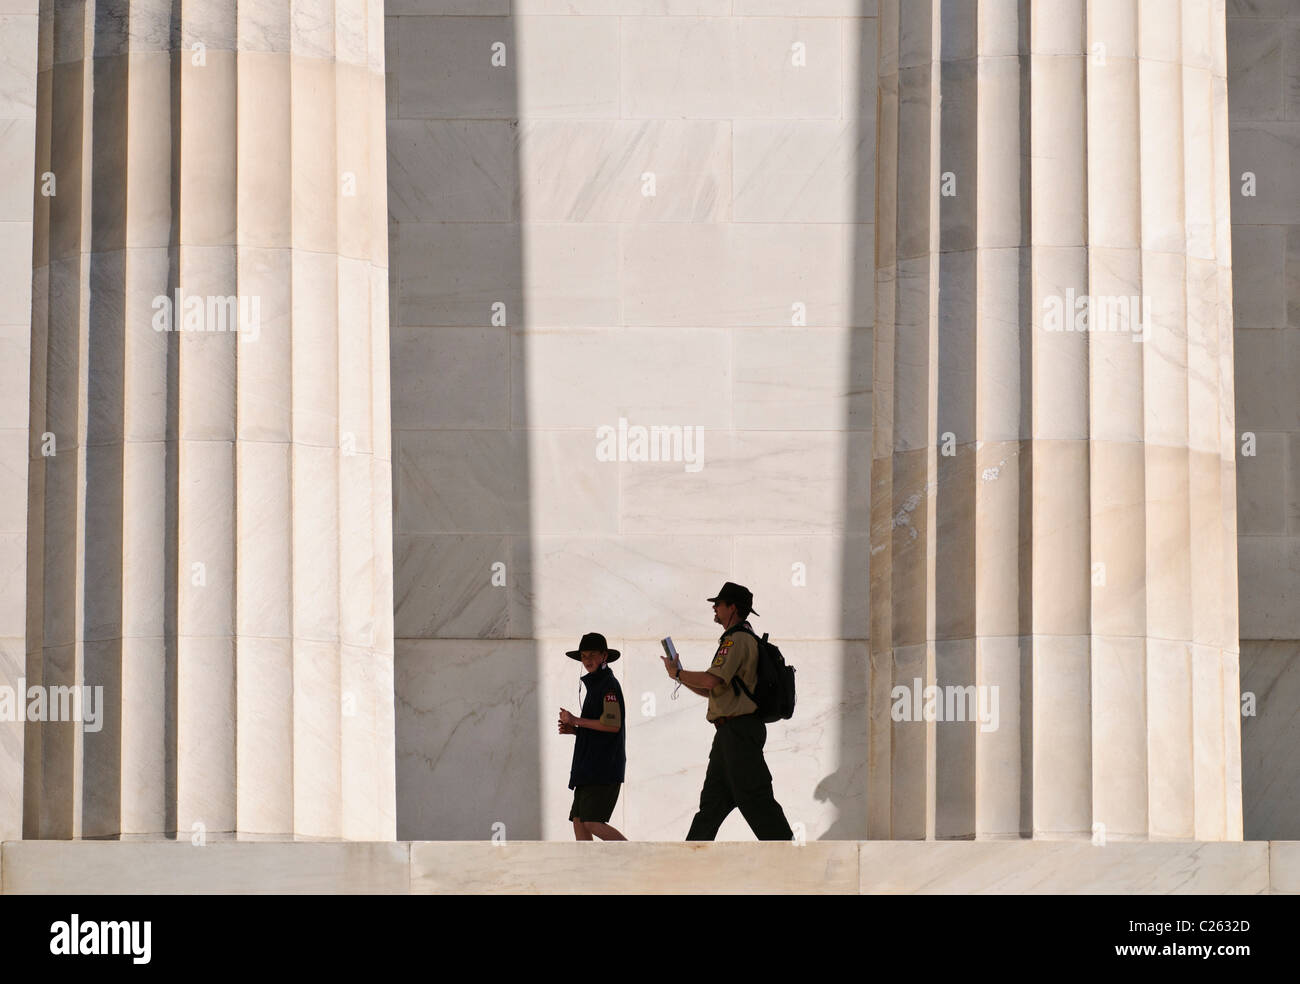 WASHINGTON DC, USA - A scoutmaster and scout are dwarfed by the massive columns when they visit the Lincoln Memorial on the western end of the National Mall in Washington DC Stock Photo